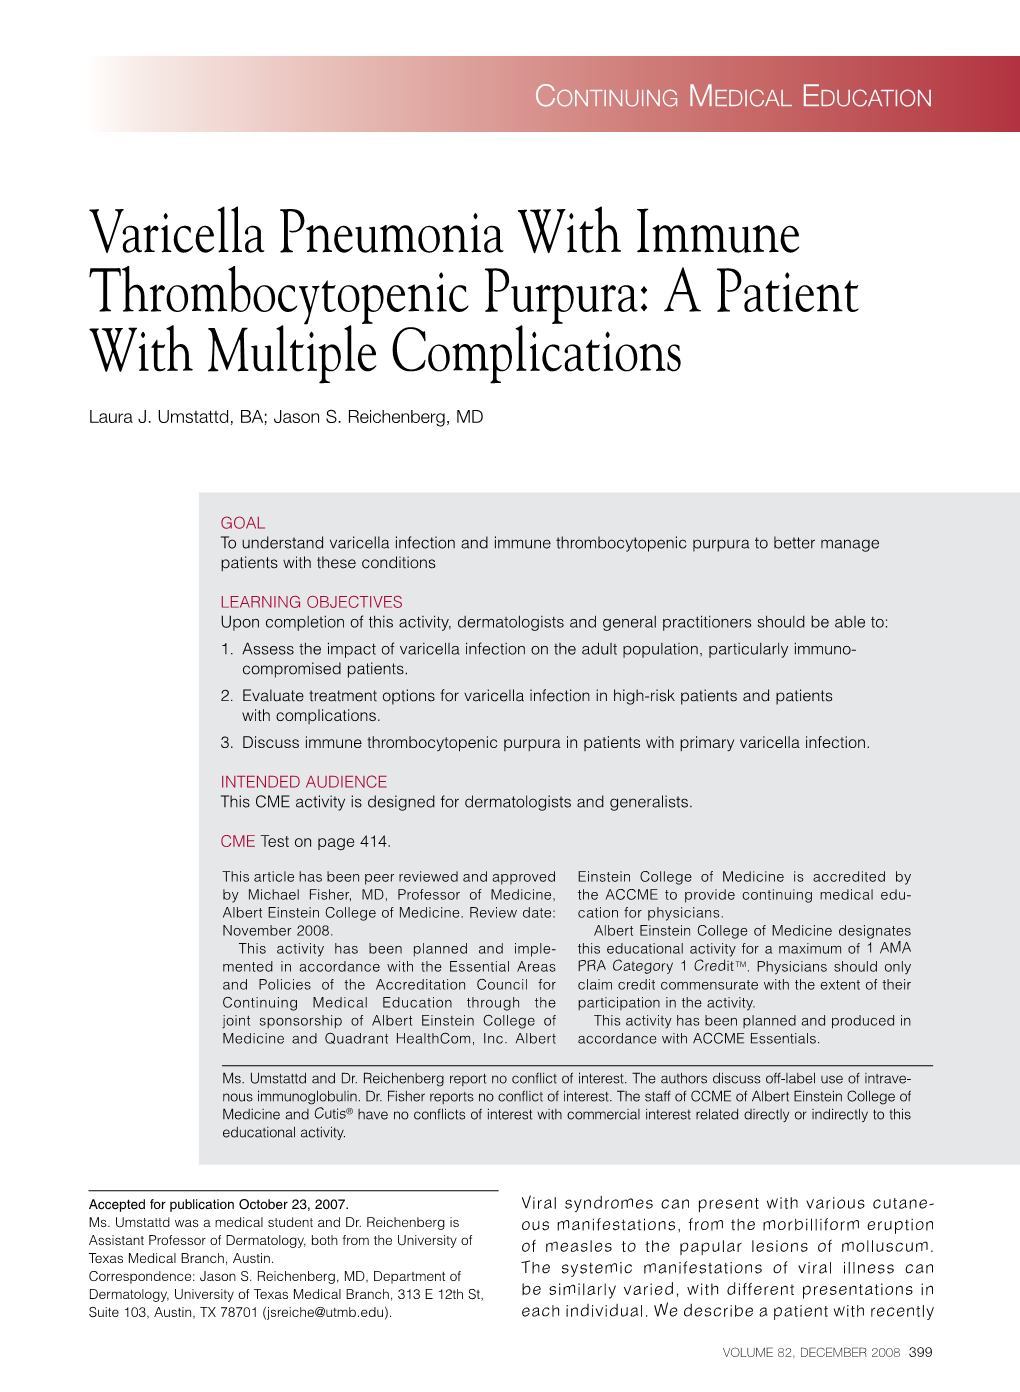 Varicella Pneumonia with Immune Thrombocytopenic Purpura: a Patient with Multiple Complications